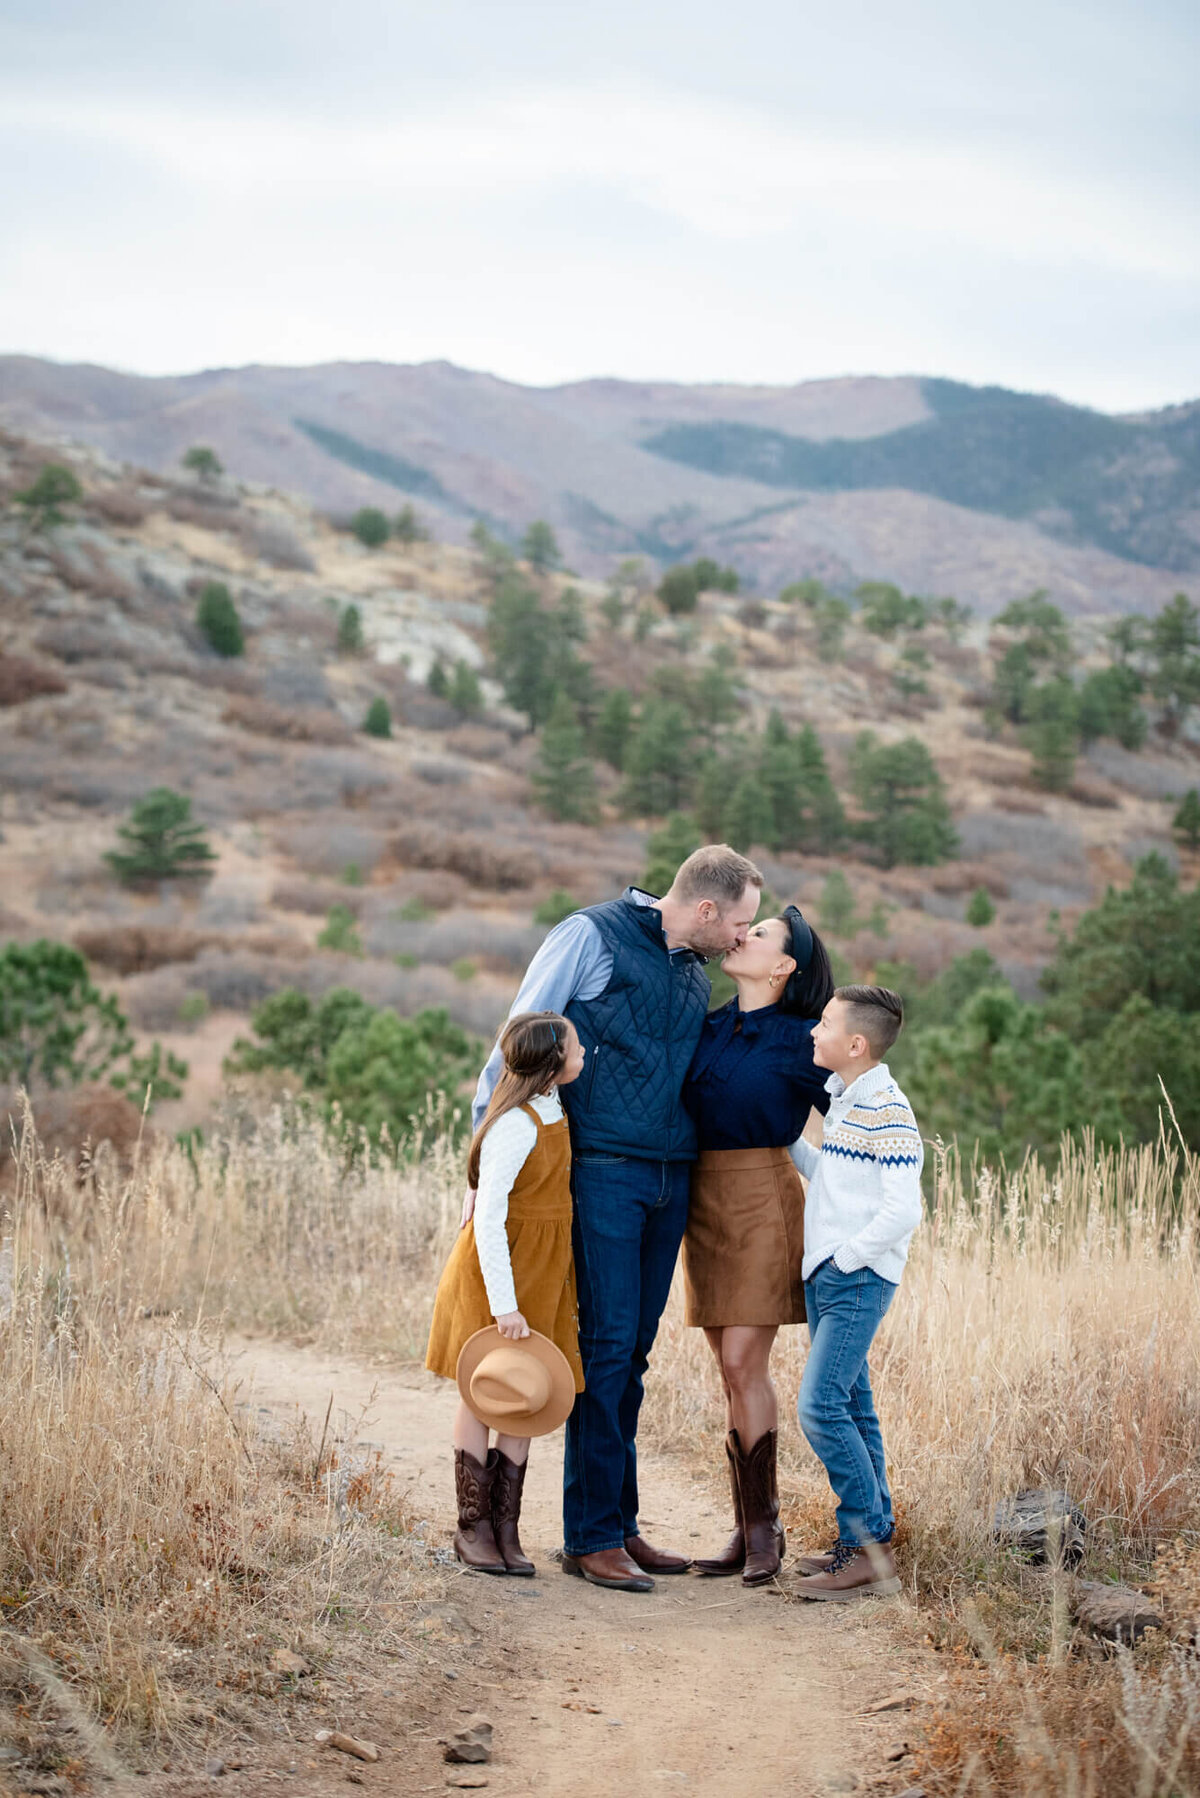 Mom and dad kiss while standing in a trail with their young son and daughter looking on